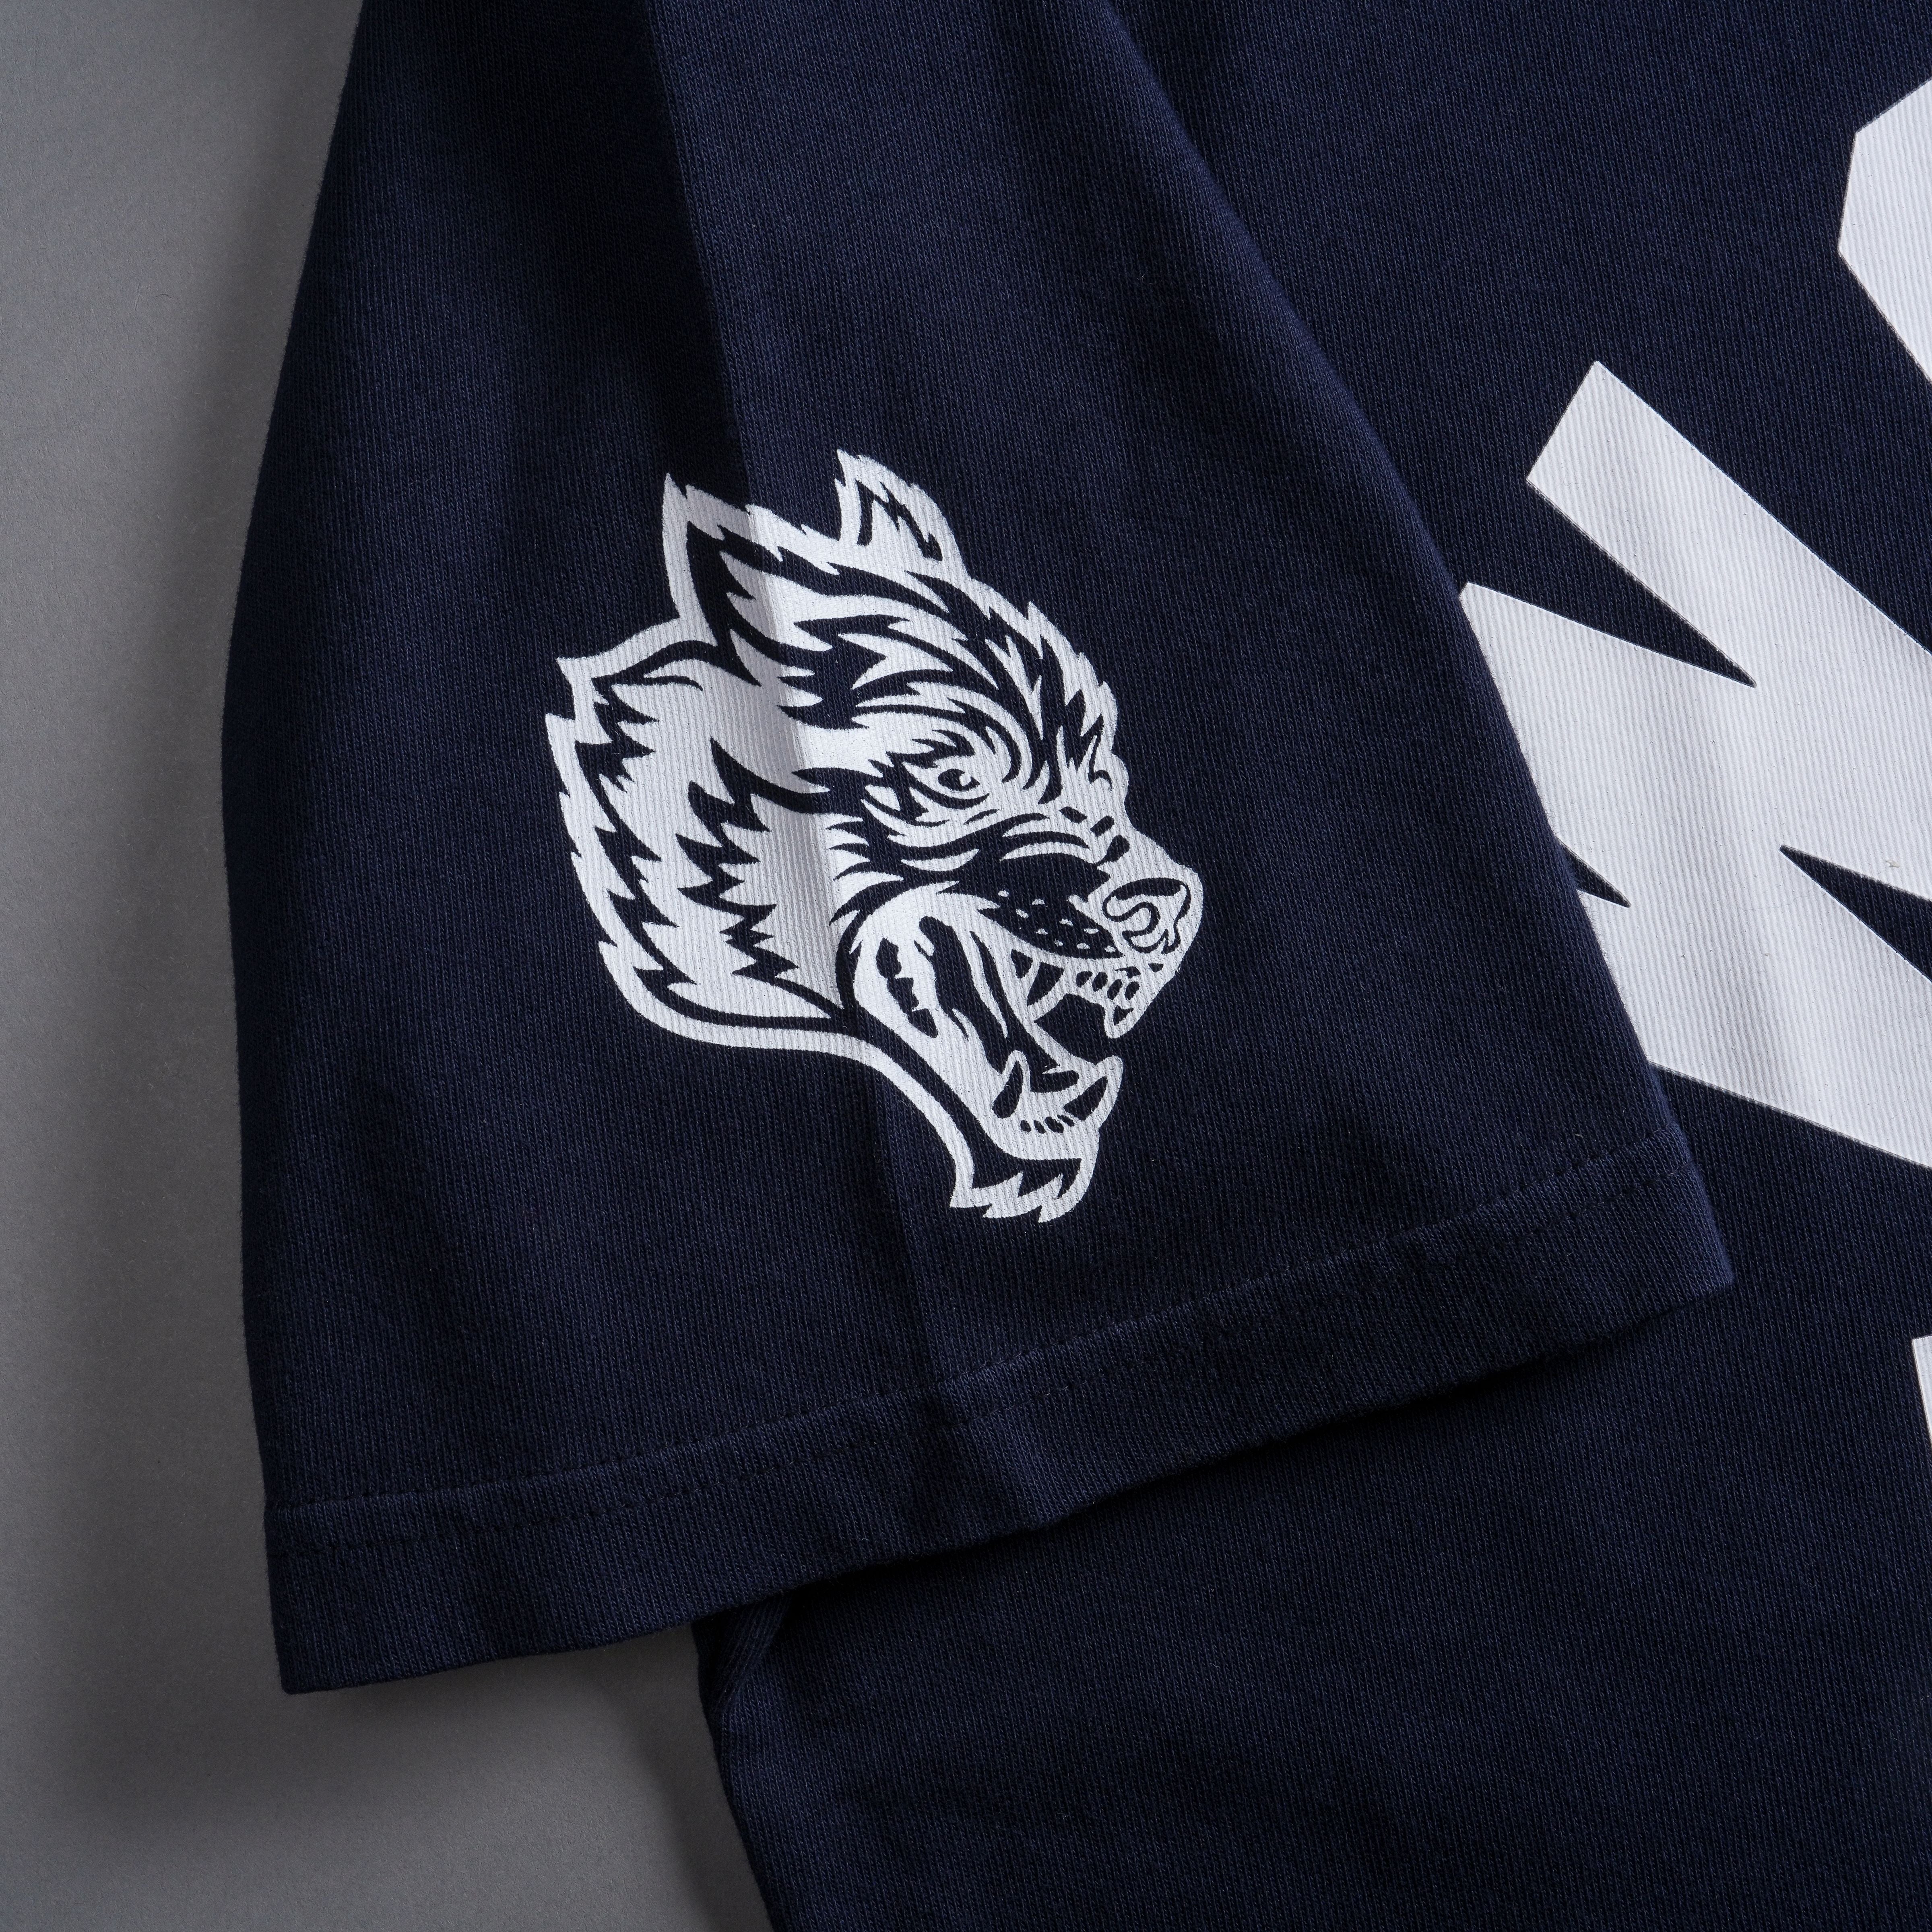 NY Wolves League "Premium" Oversized Tee in Navy